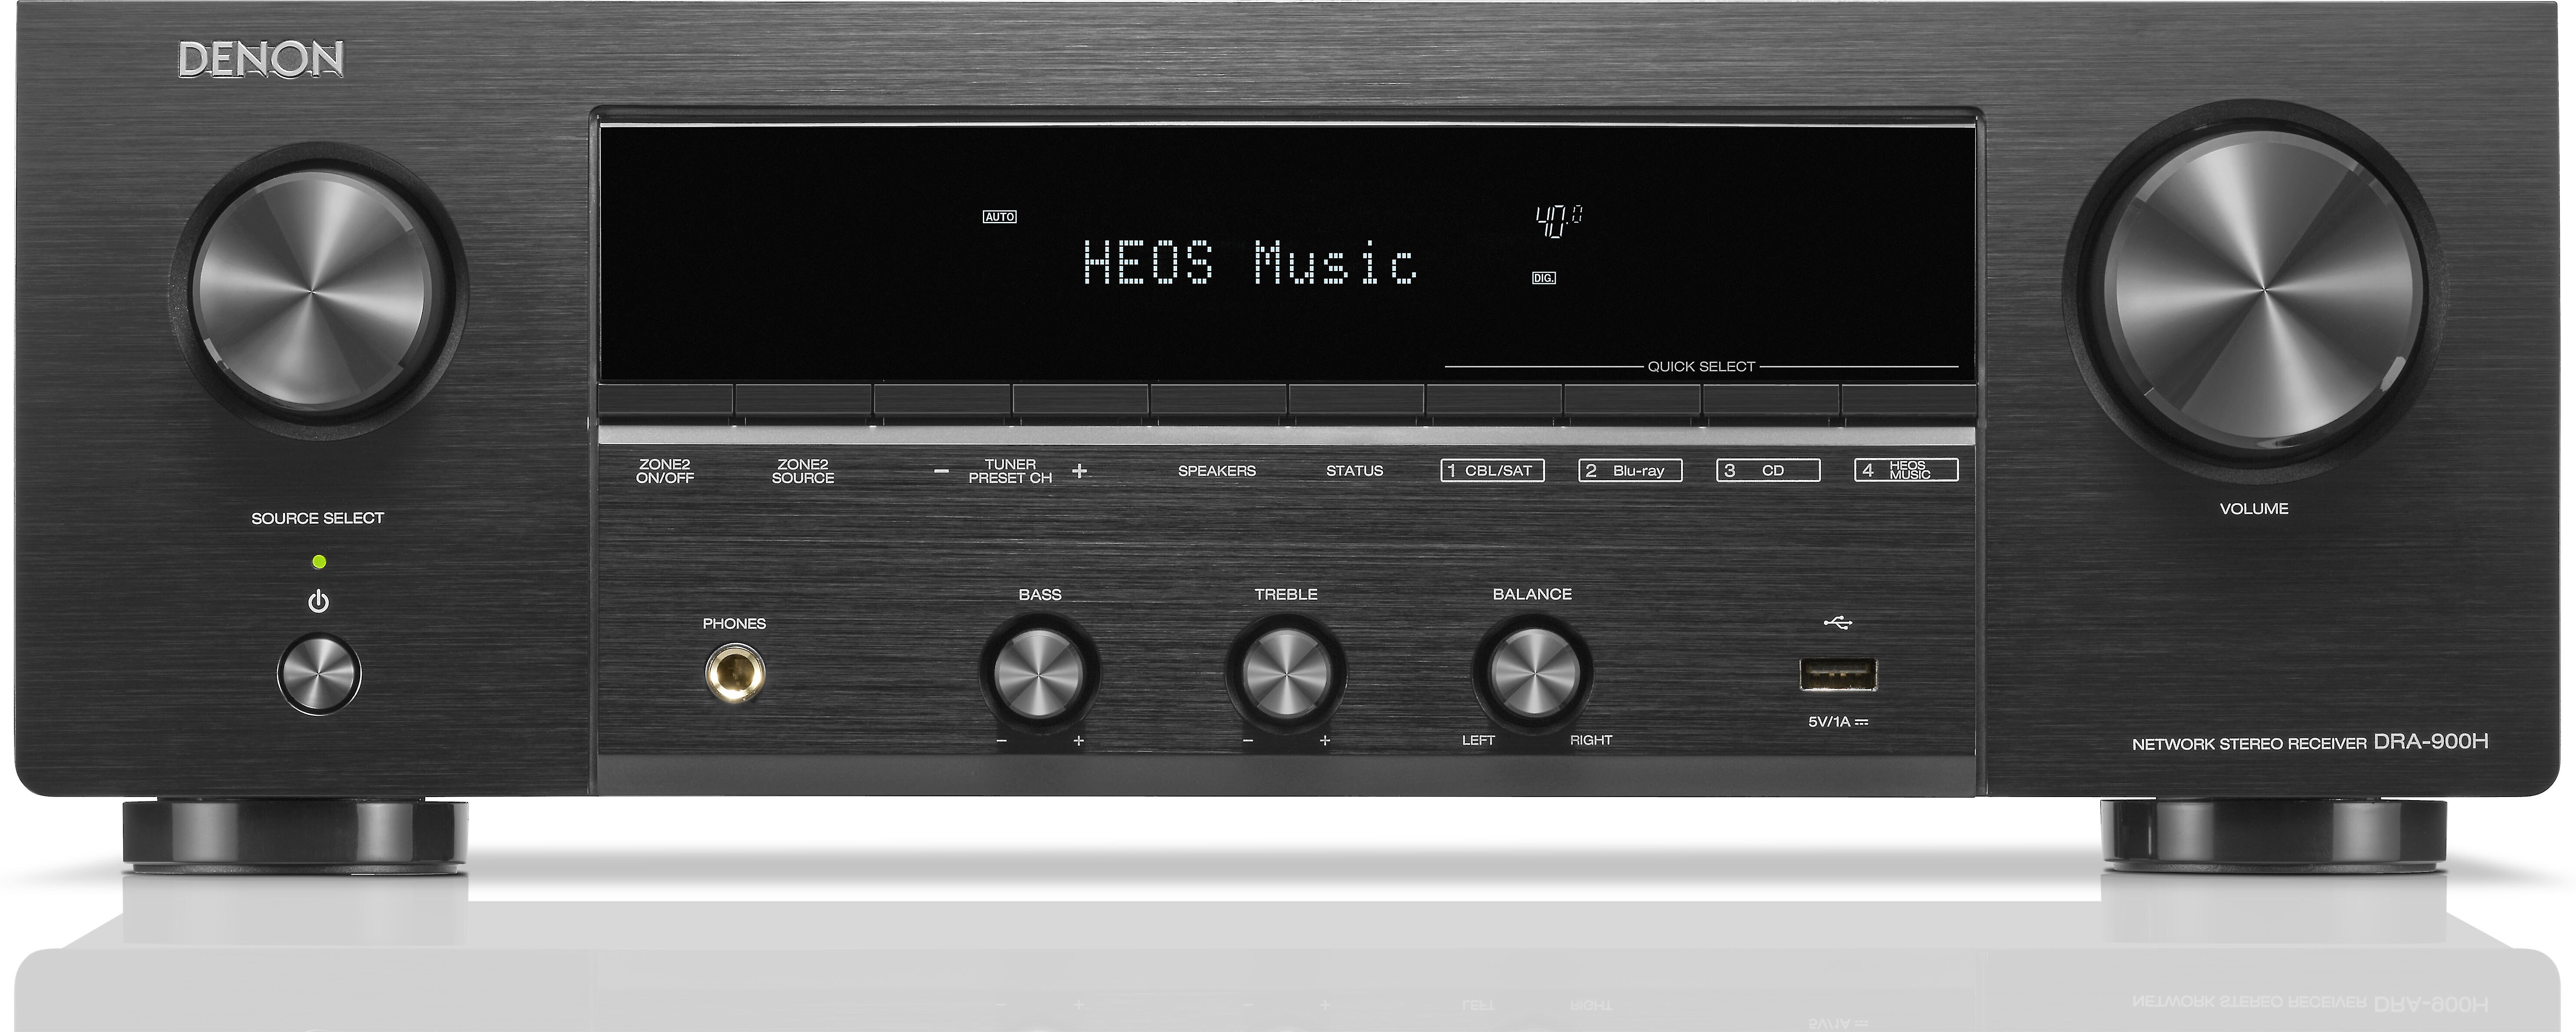 receiver 2, built-in HDMI, Apple DRA-900H AirPlay® HEOS Product Denon Videos: Wi-Fi®, and with at Stereo Bluetooth®, Built-in Crutchfield